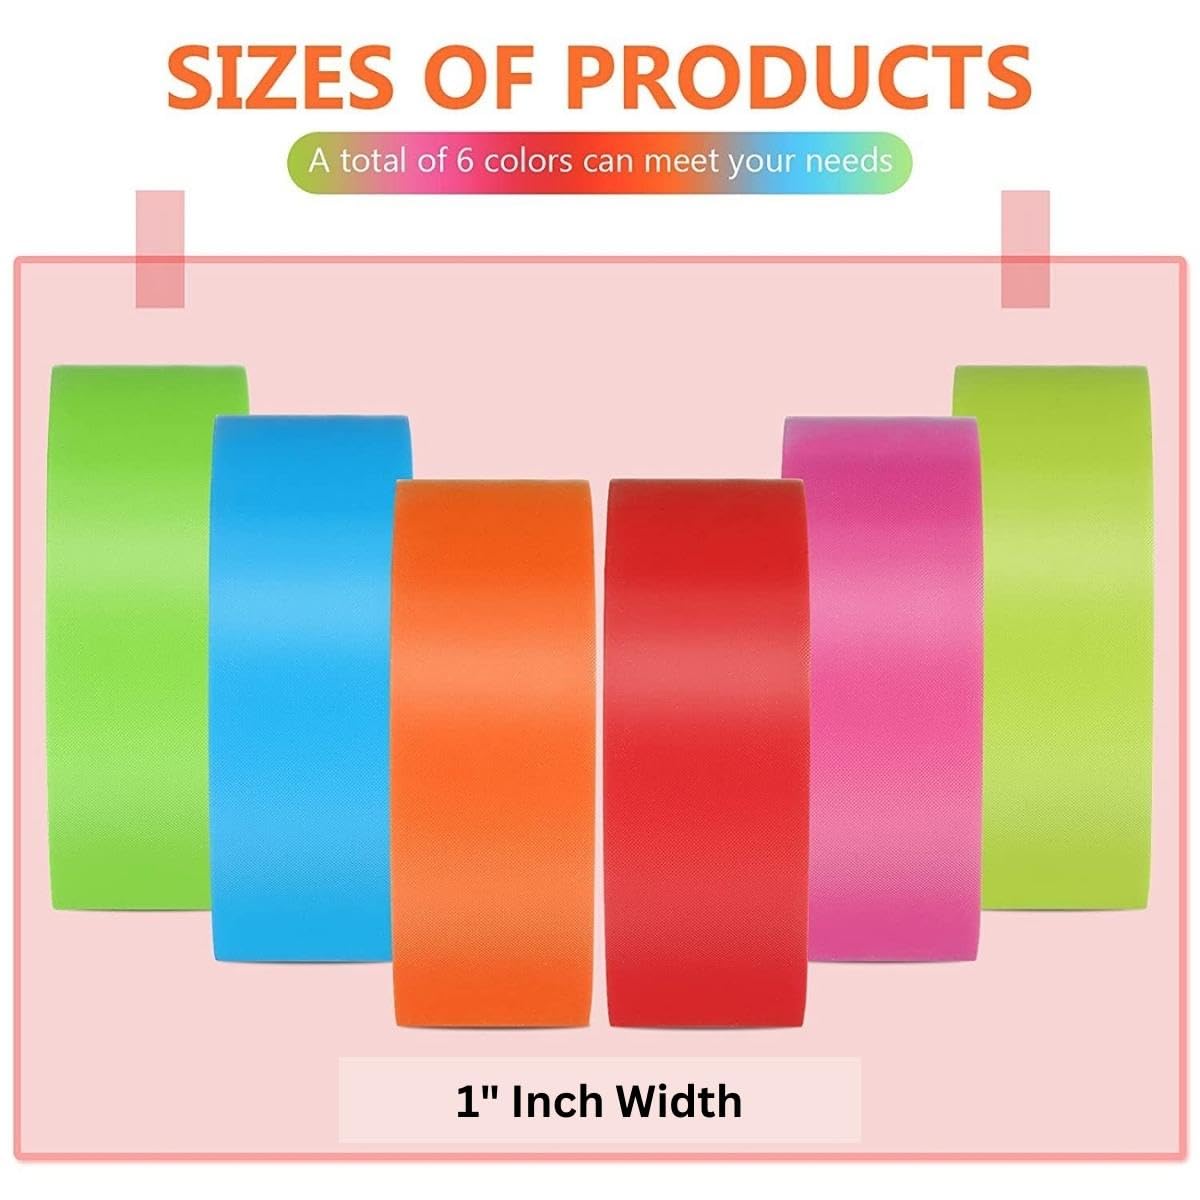 SINGHAL Flagging Tape Pink 1 Inch width 300 feet Length for marking and flagging various areas | Highly Visible (Combo Pack of 6)